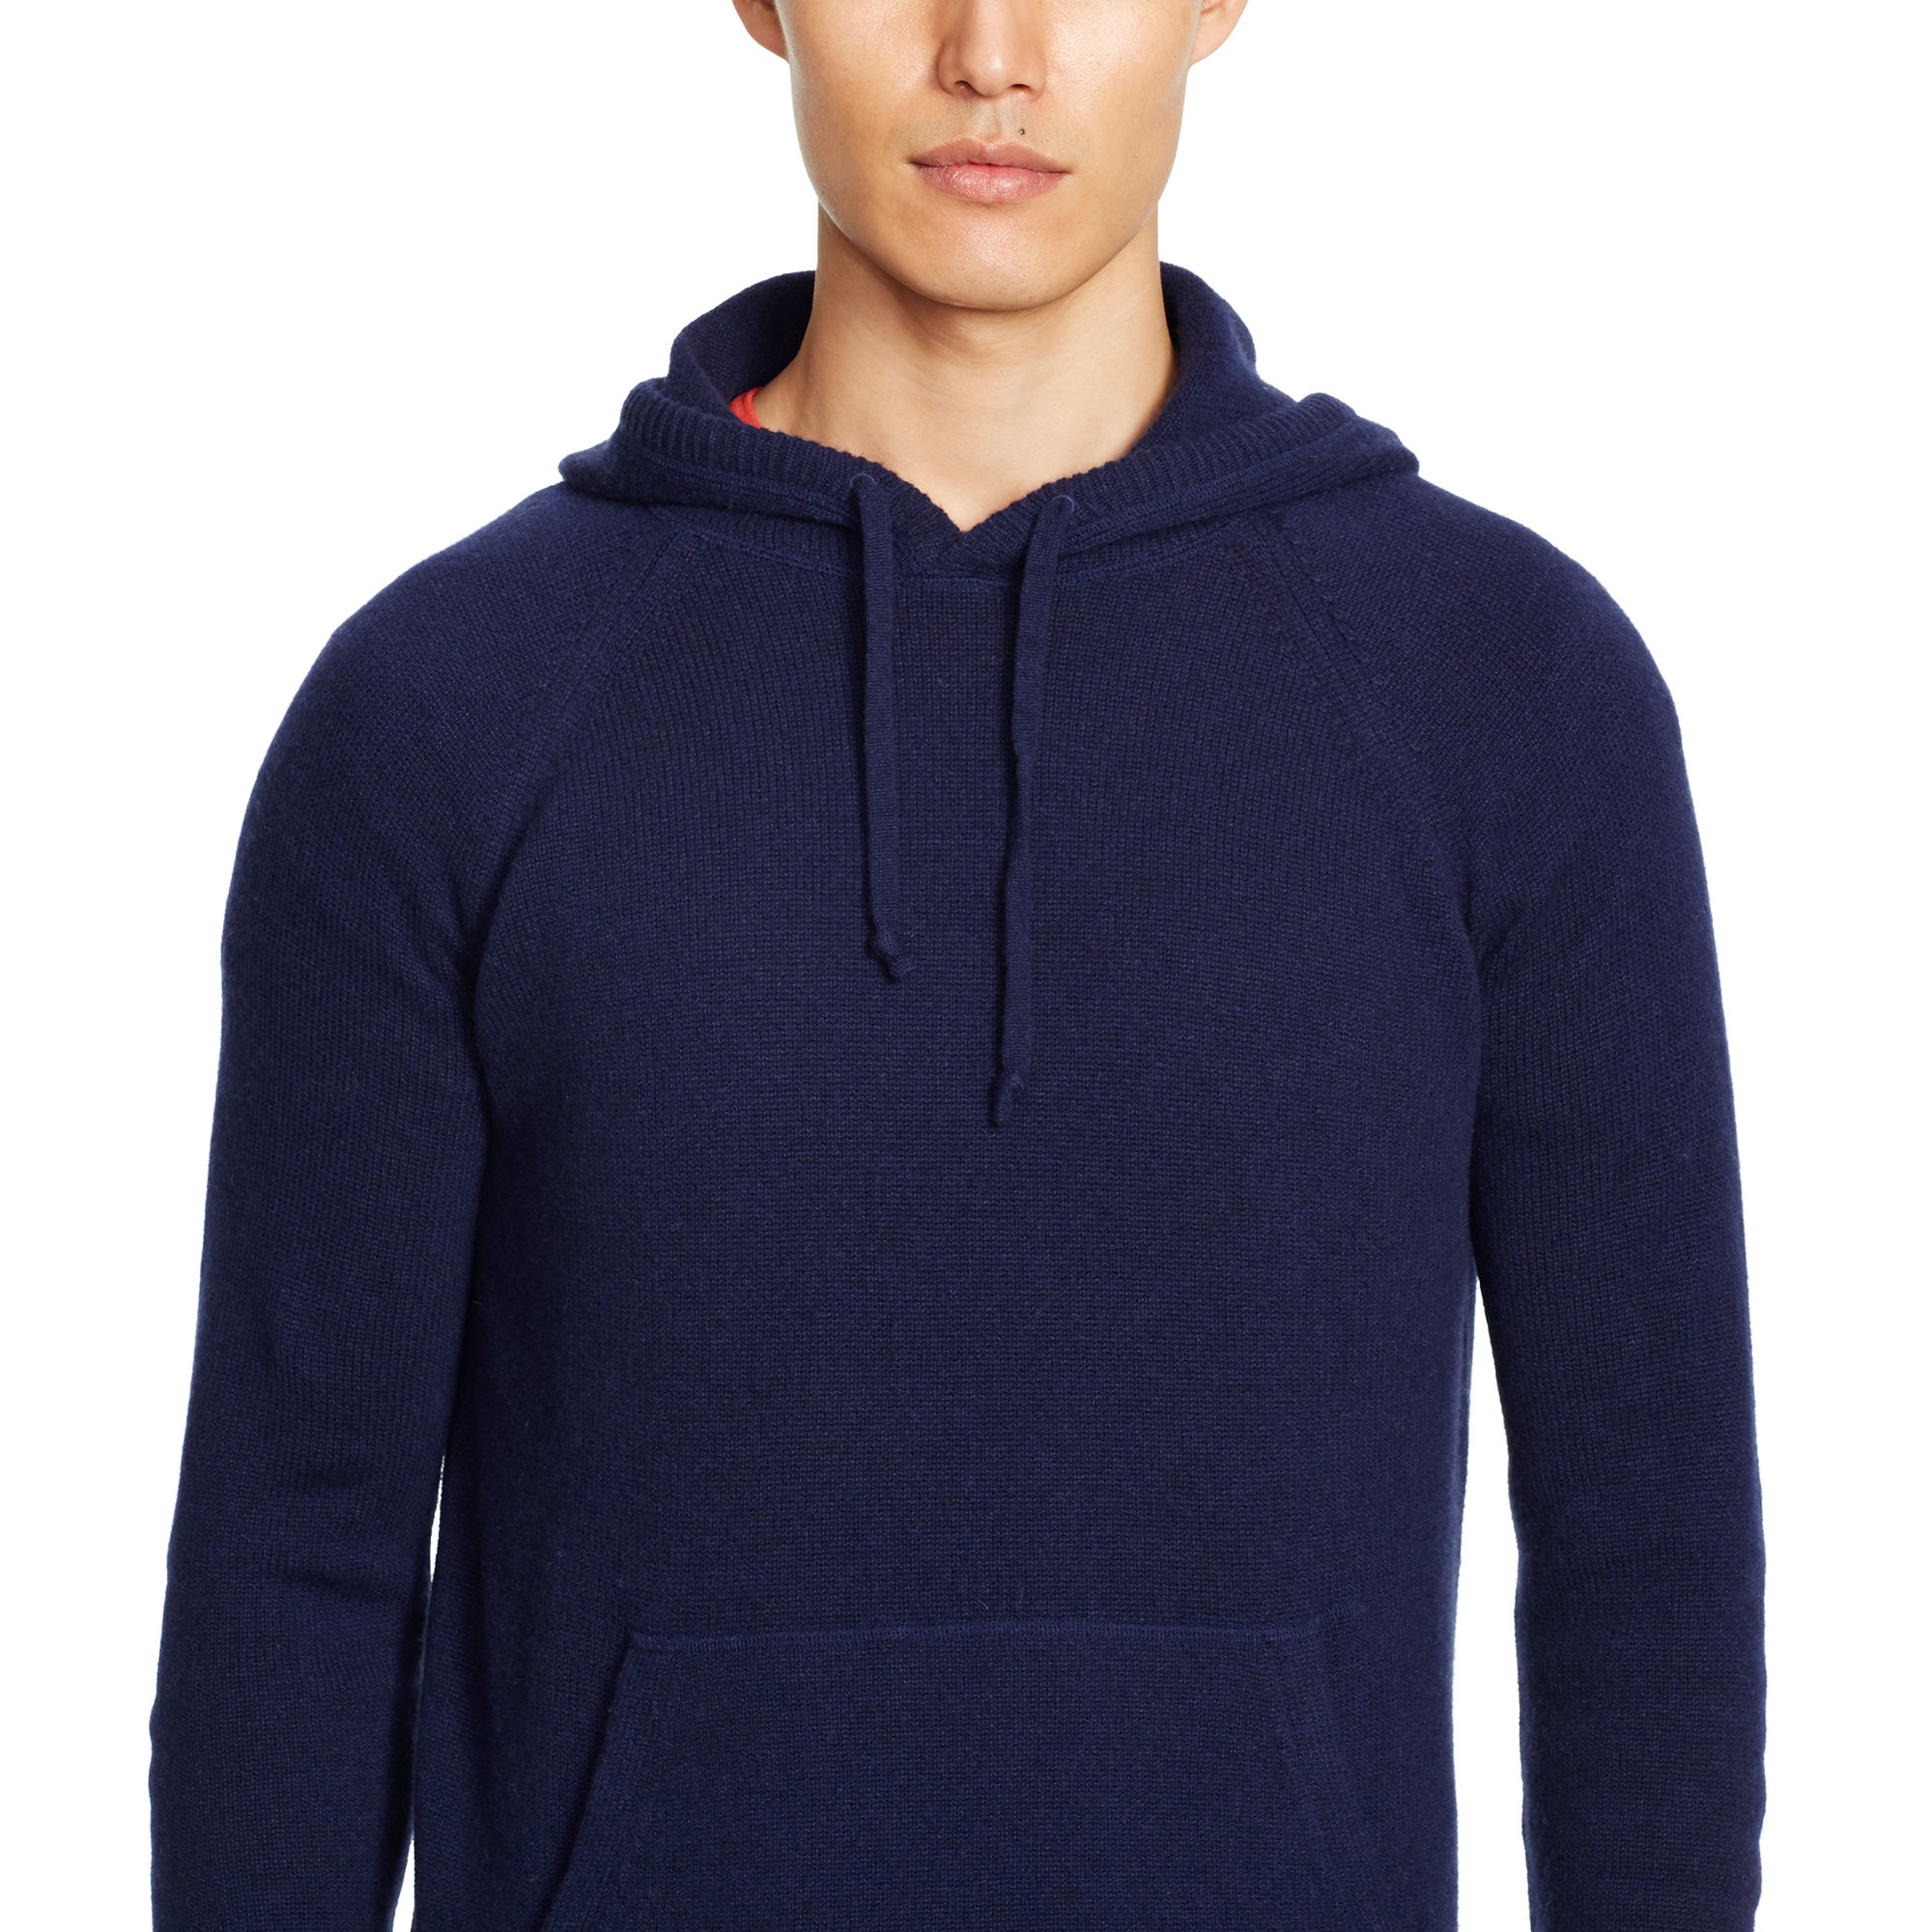 Polo Ralph Lauren Cashmere Hoodie in Bright Navy (Blue) for Men - Lyst